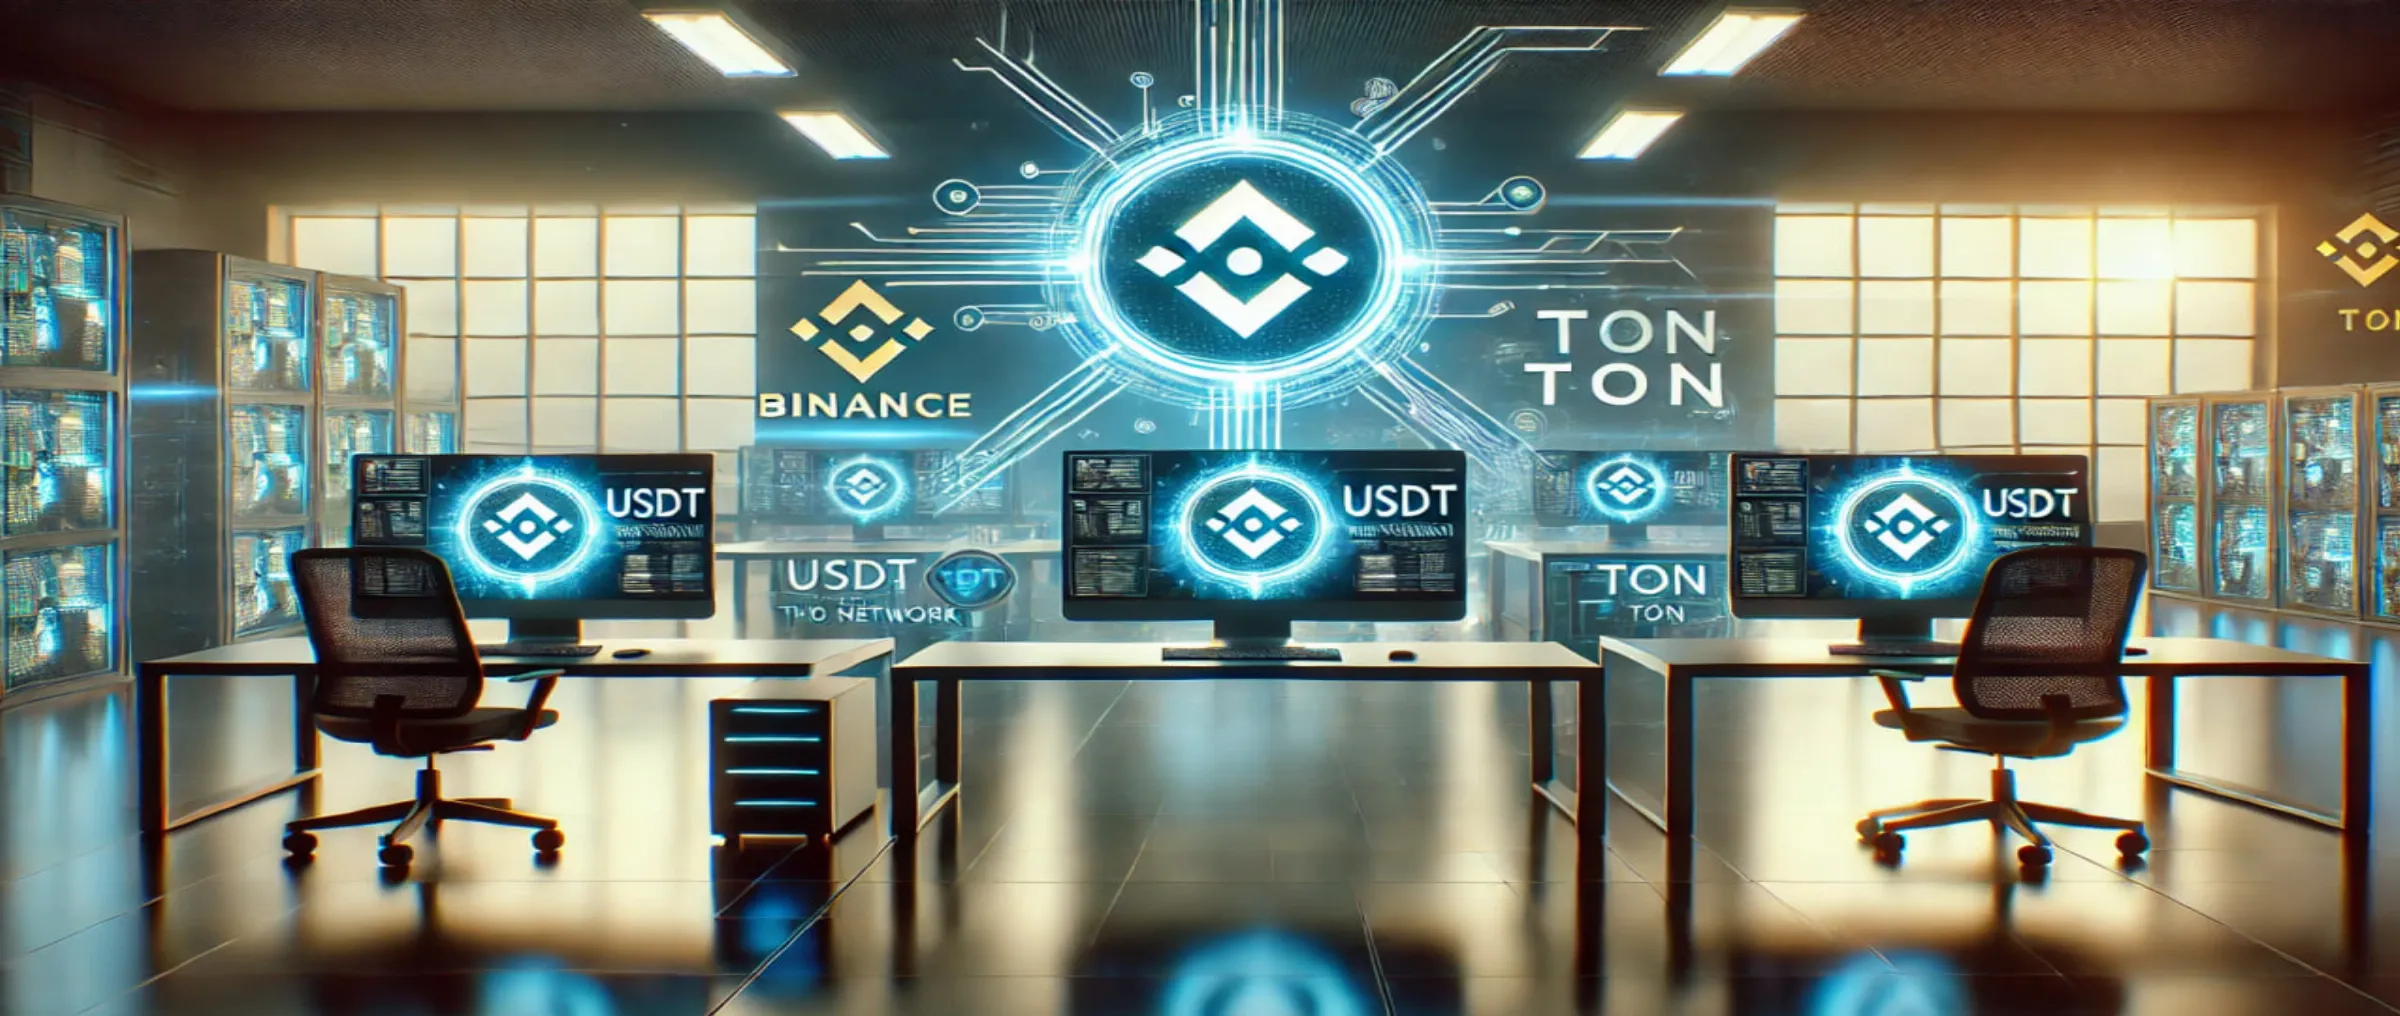 Binance integrated USDT support for TON